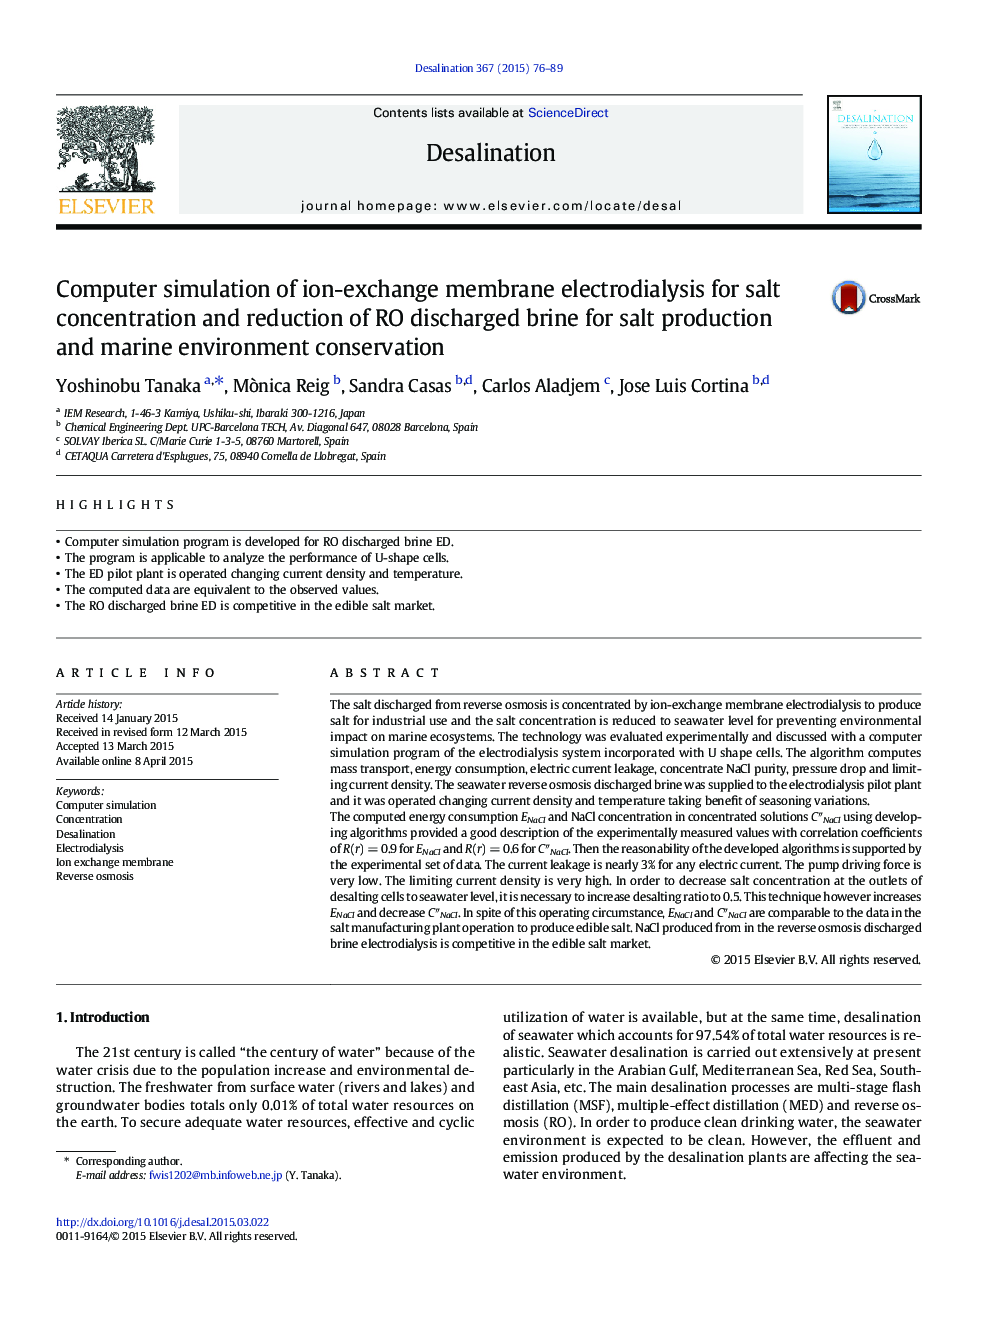 Computer simulation of ion-exchange membrane electrodialysis for salt concentration and reduction of RO discharged brine for salt production and marine environment conservation